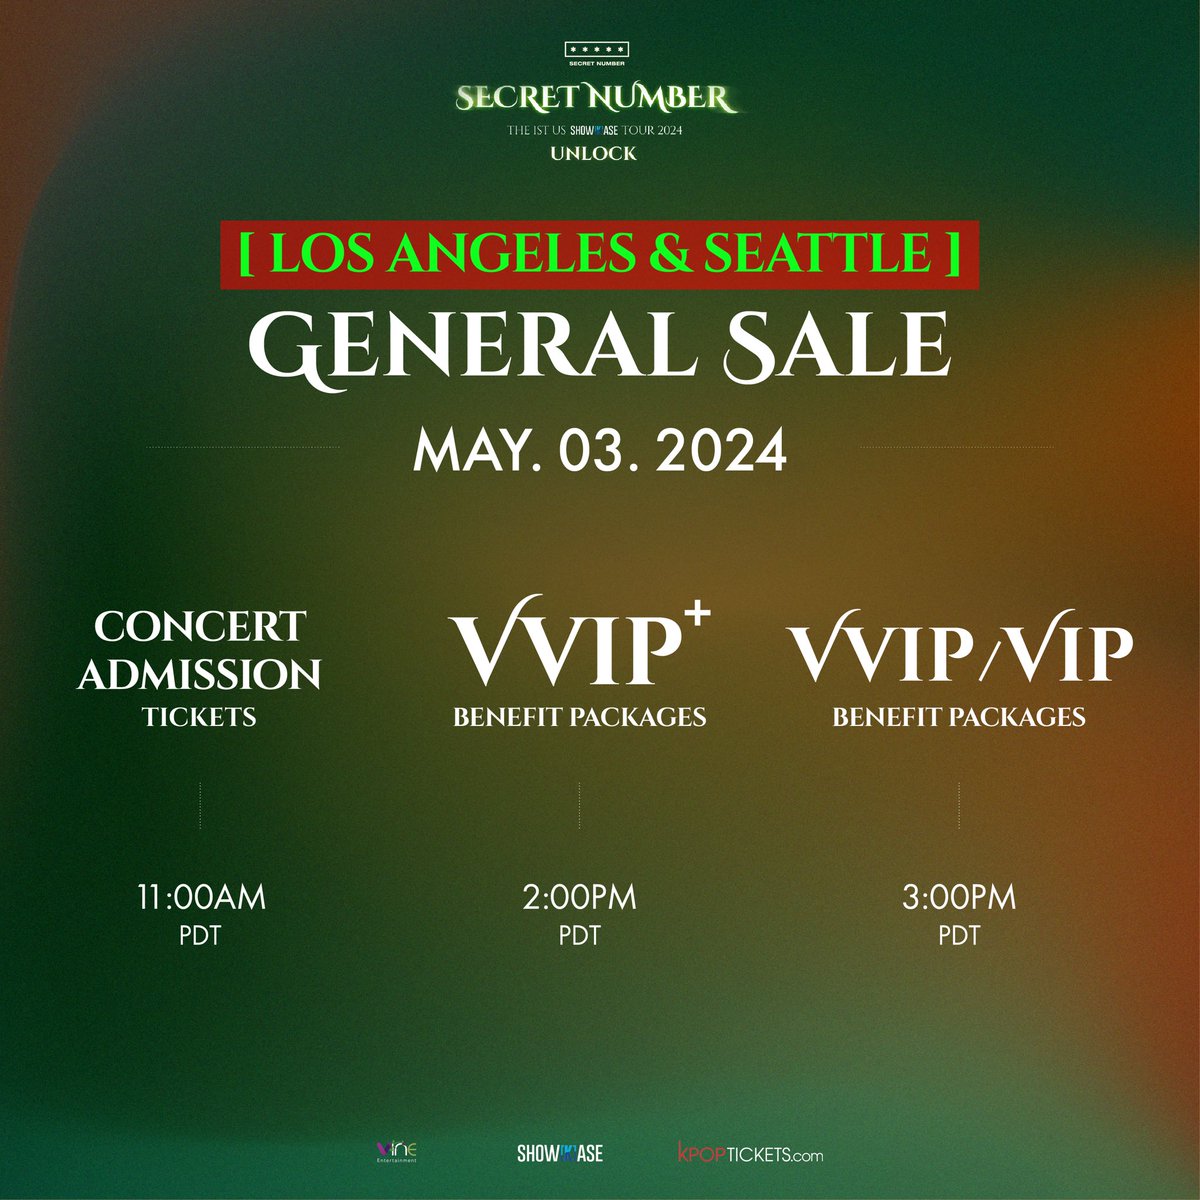 LOS ANGELES and SEATTLE #LOCKEY IT IS FINALLY YOUR TIME 📢! General Sale for all ticket tiers starts TODAY!🙌 Please check the times below🕒: 🎟️ Concert Admission: 11:00AM PDT 🌟 VVIP+: 2:00PM PDT 🌟 VVIP / VIP: 3:00PM PDT 🔗 kpoptickets.com/collections/sh… #KPOP_ShowKase #SECRETNUMBER